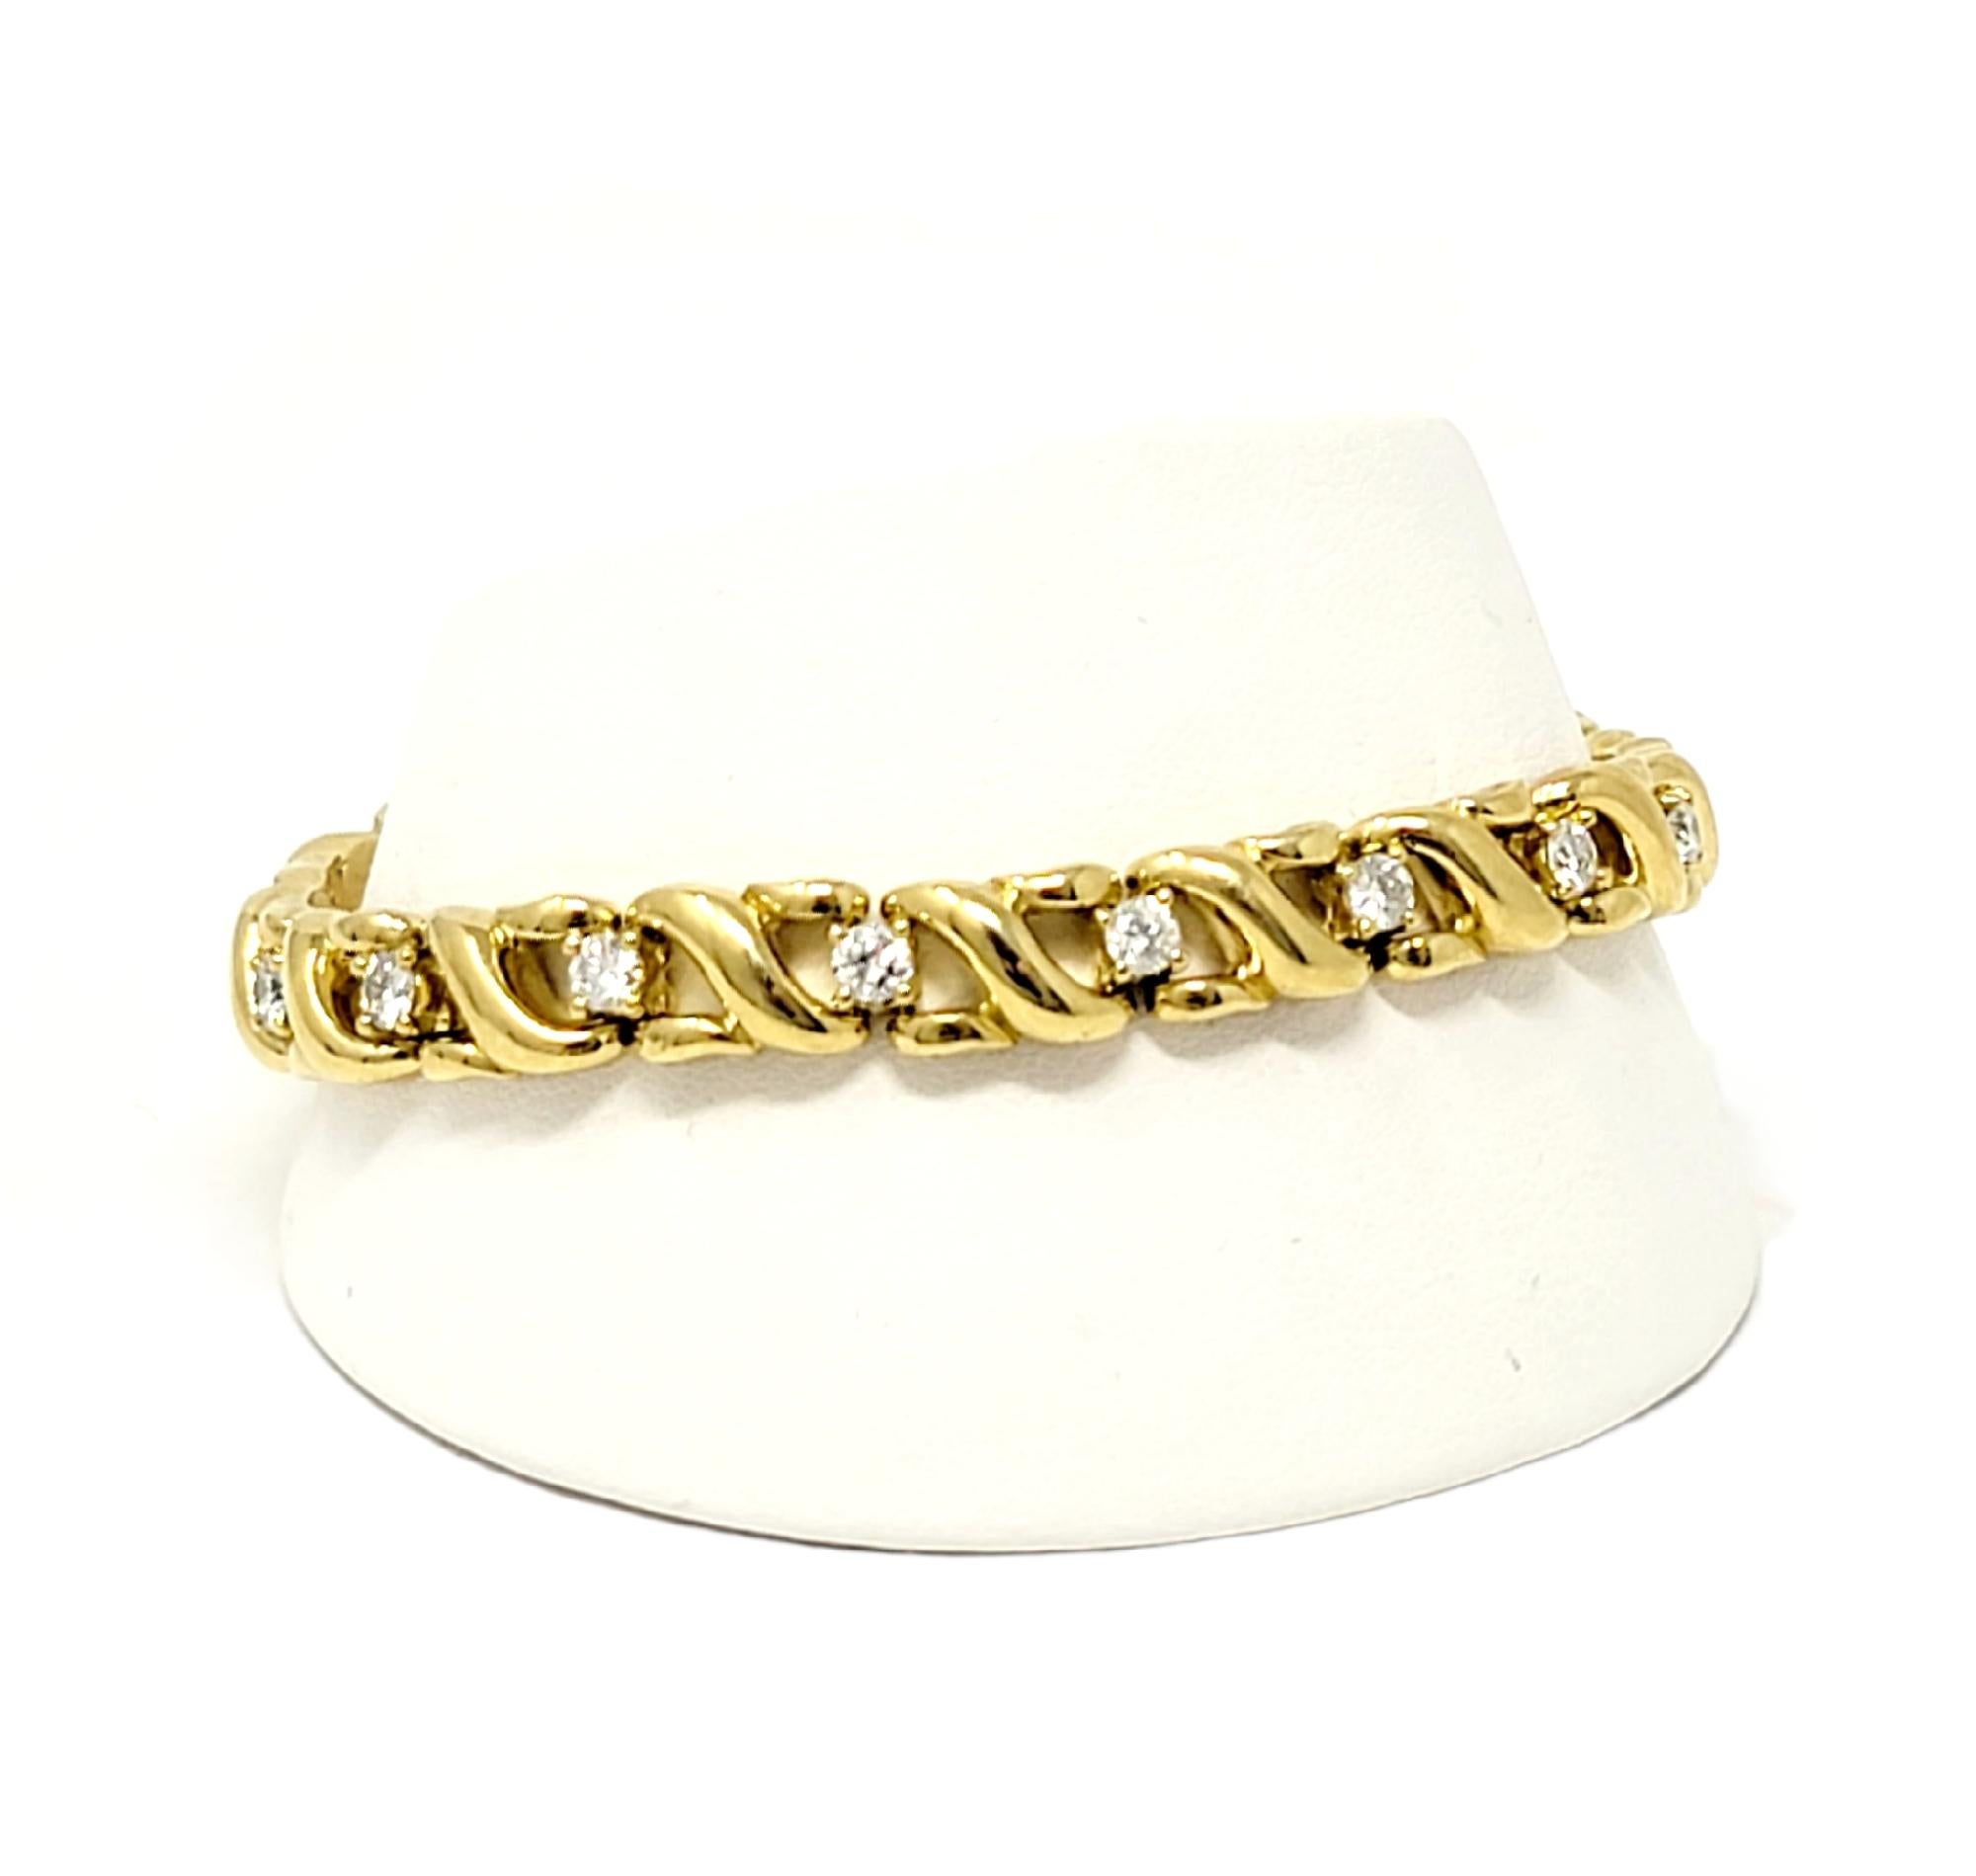 Lovely and feminine diamond and 18 karat yellow gold link bracelet. This timeless piece has a simple yet elegant design that will go with just about everything. It features 17 sparkling round diamonds, G-I in color, VS2-SI2 in clarity, and totaling